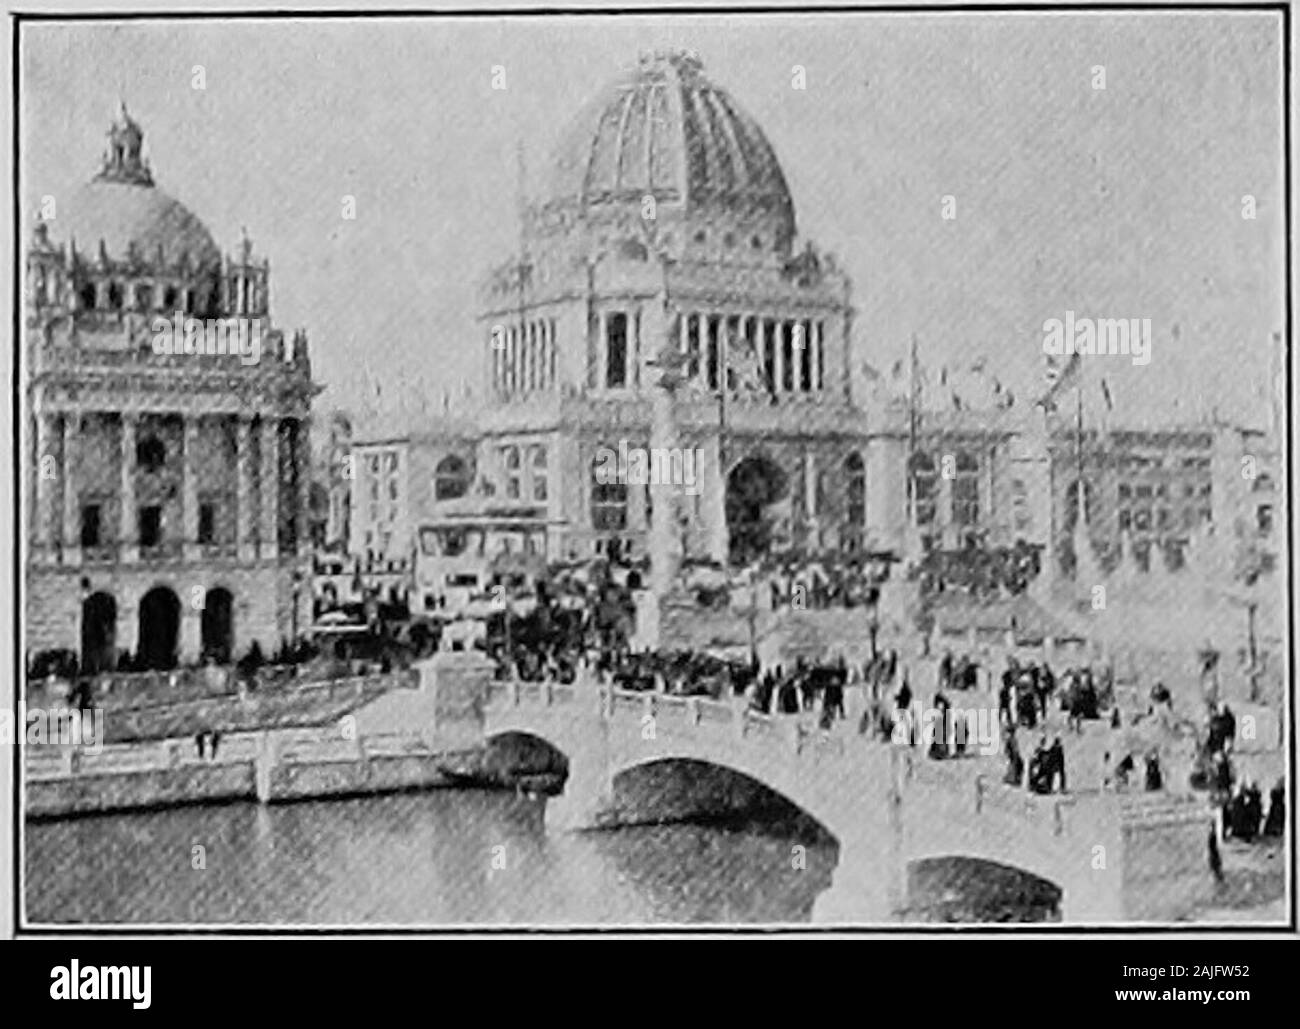 History of the United States from the earliest discovery of America to the end of 1902 . xplosion, the brave engineer barely 1893] WORLDS COLUMBIAN EXPOSITION loi saved his life. Firemen were soon onhand. Sixteen of them forthwith madetheir way to the balcony near the blazingsummit. Suddenly their retreat was cutoff by a burst of fire from the base of thetower. The rope and hose parted and pre-cipitated a number who were sliding backto the roof. Others leaped from the colos-sal torch. In an instant, it seemed, thewhole pyre was swathed in flames. As ittoppled, the last wretched form was seen t Stock Photo